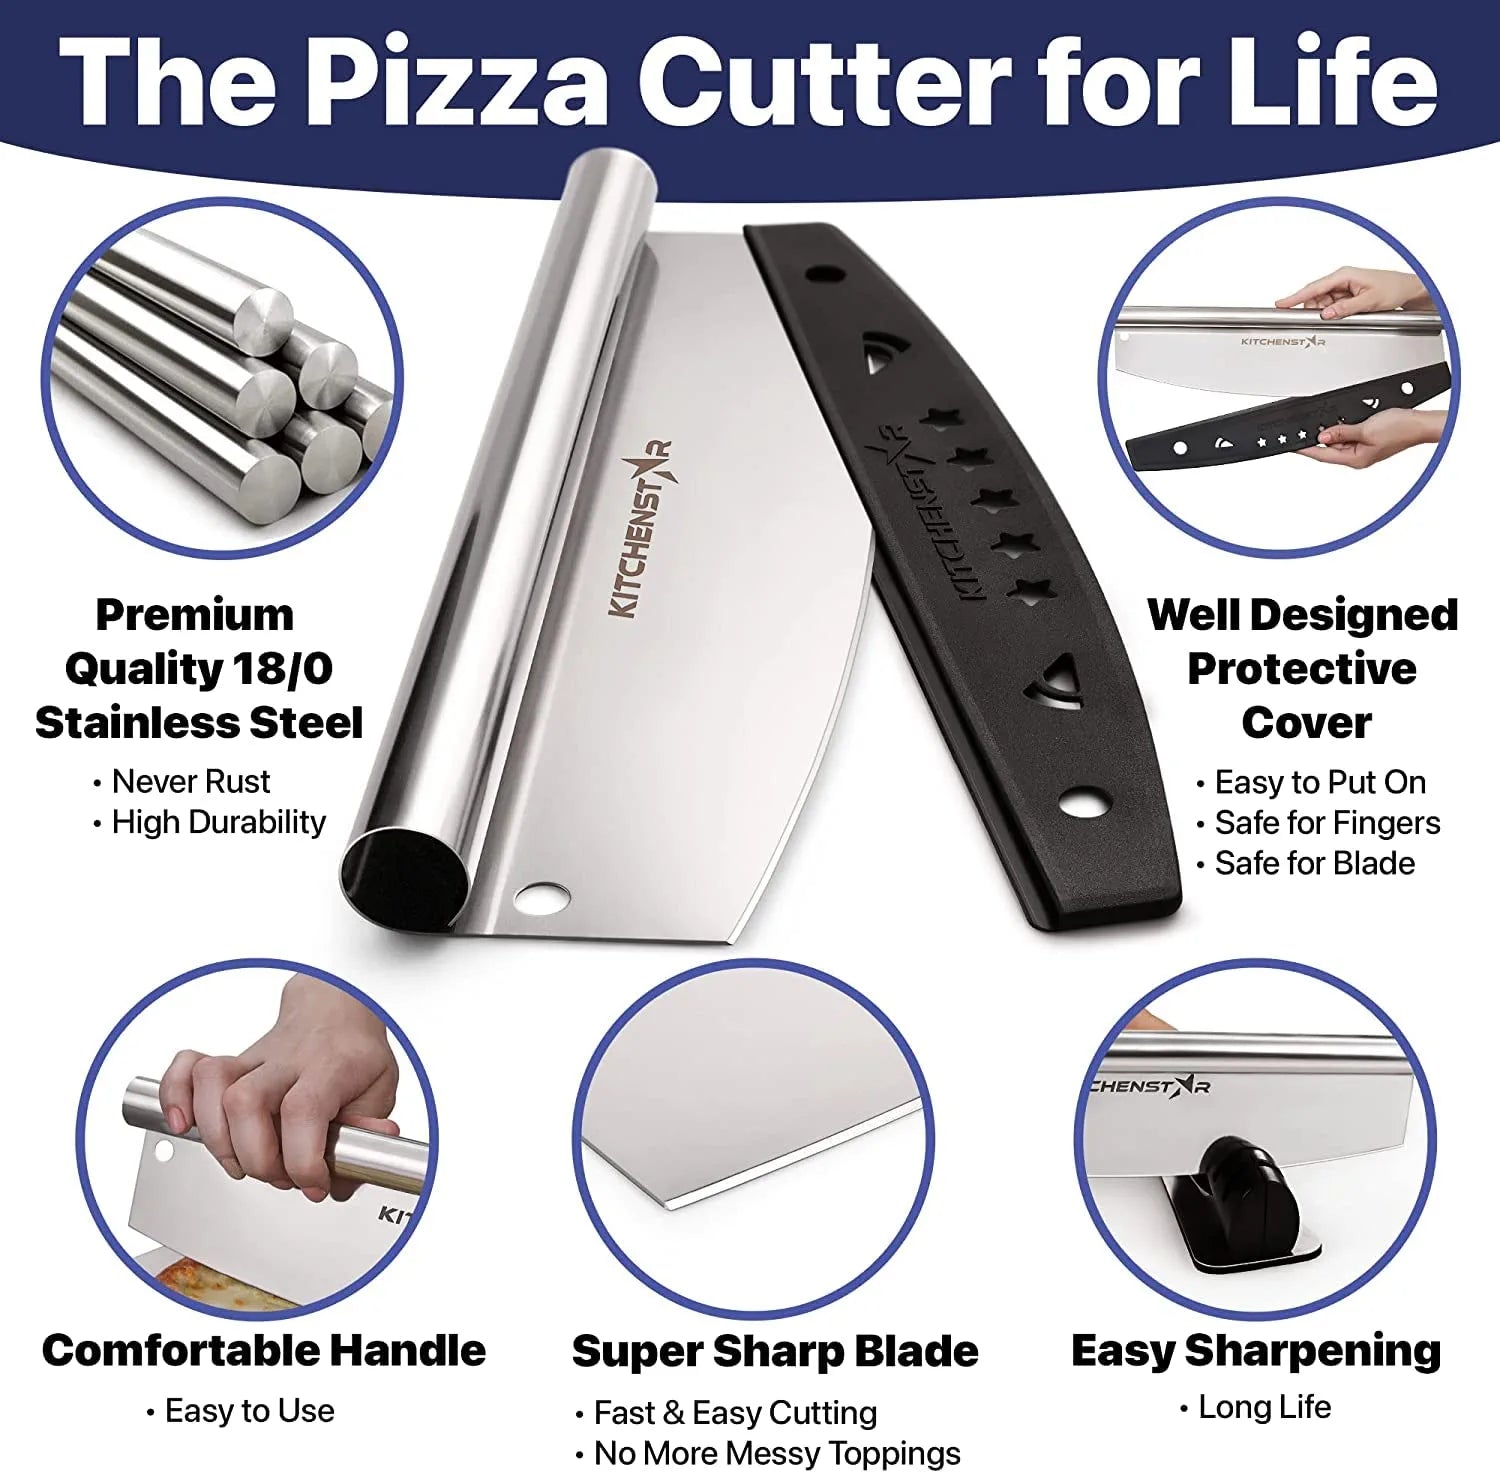 KitchenStar Pizza Cutter Rocker 12 inch, 2-Pack - Super Sharp Stainless Steel Slicer Knife with Hanging Hole & Protective Blade Cover, 2 pcs. - Fast and Easy Slicing, Dishwasher Safe